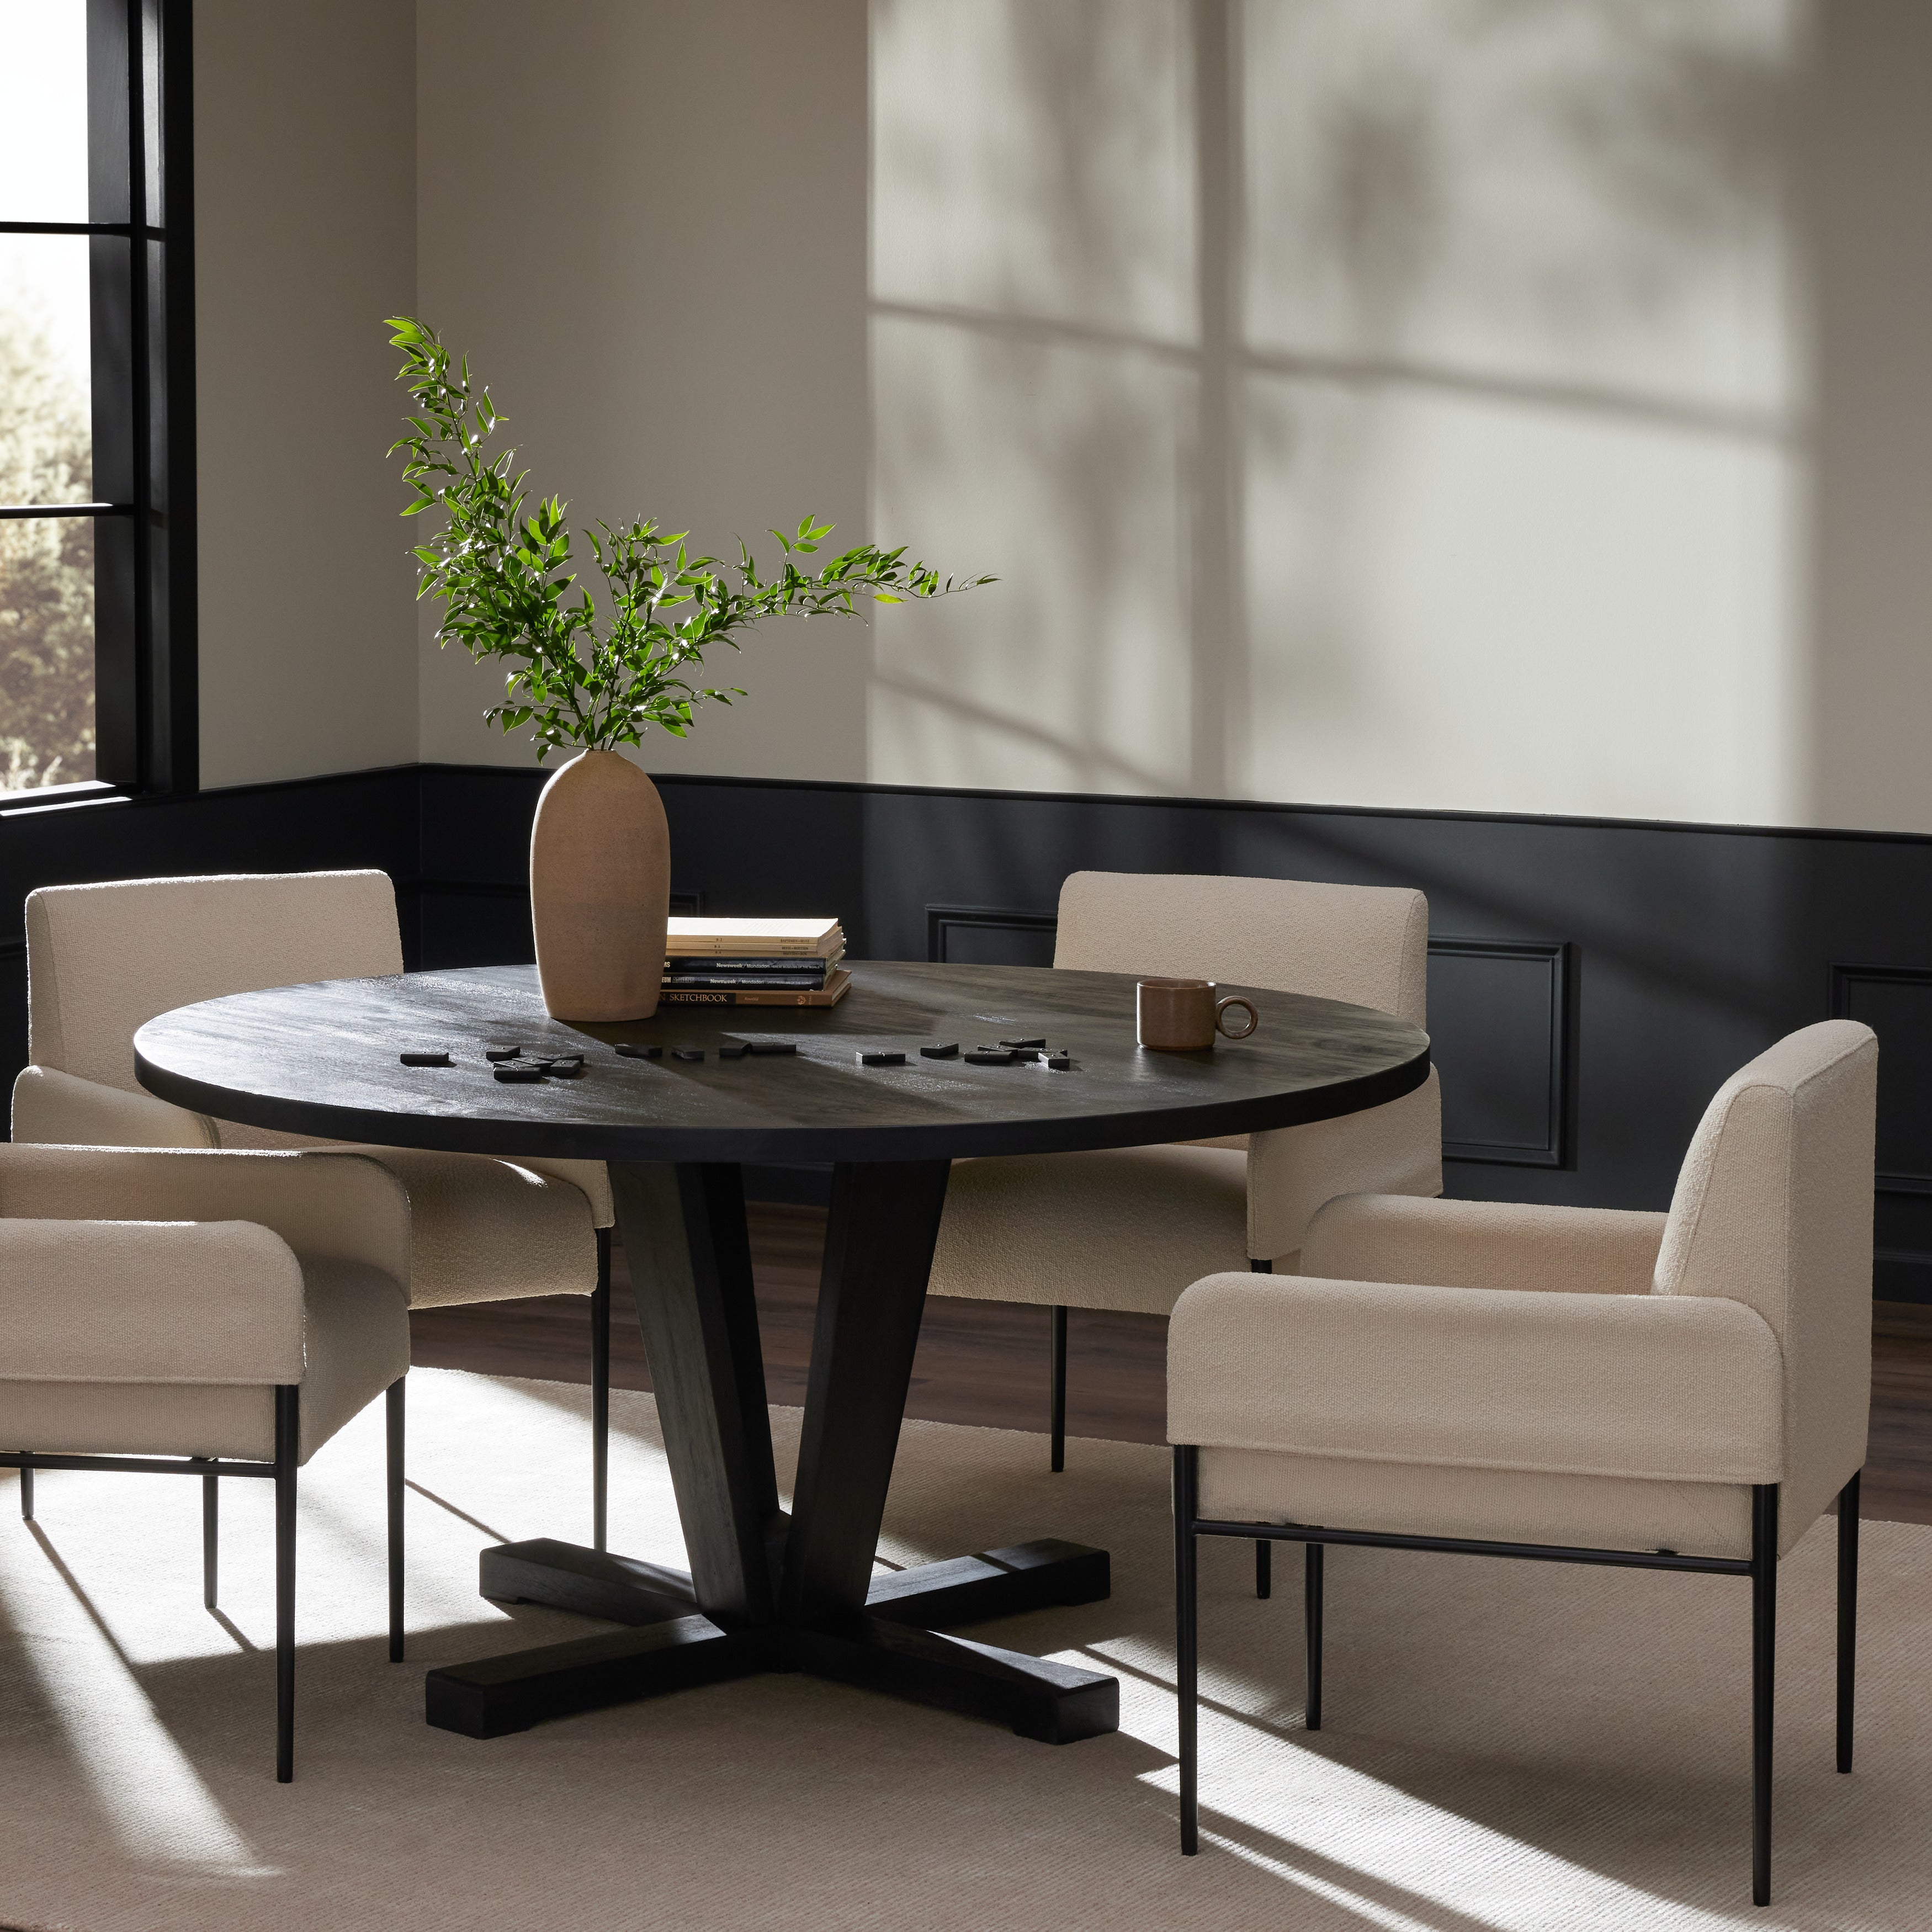 A rounded table of solid mango wood forms purposefully burnished edges, producing a warm black patina for the home dining table. Amethyst Home provides interior design, new construction, custom furniture, and area rugs in the Scottsdale metro area.